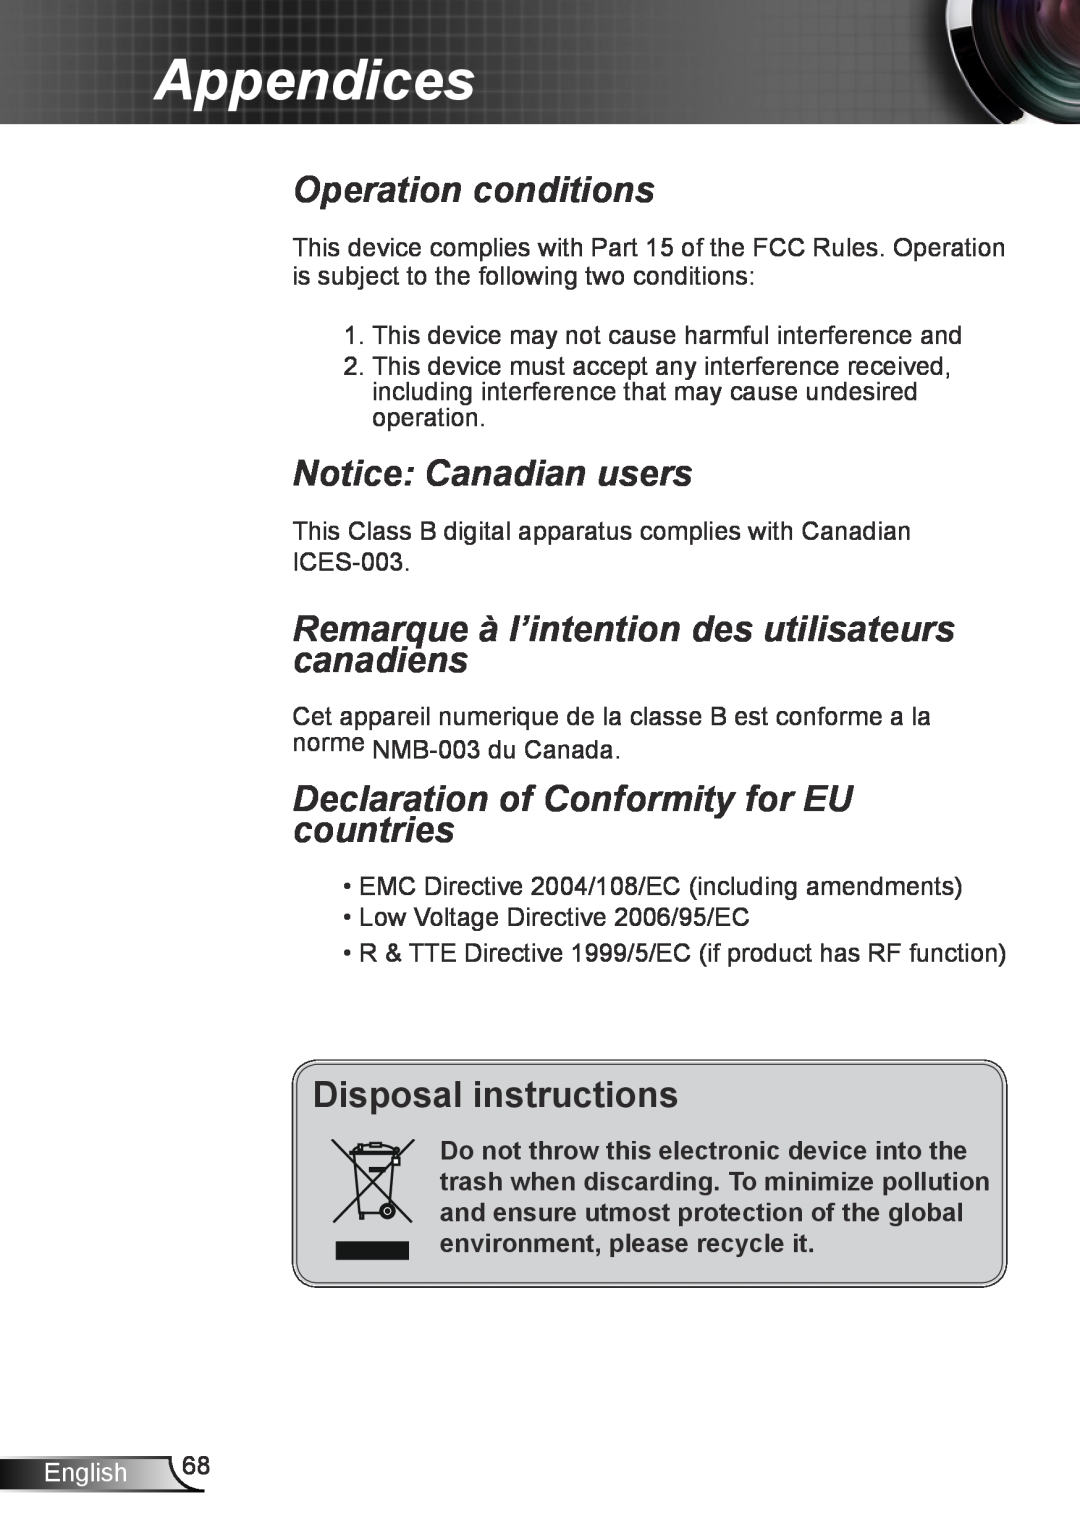 Optoma Technology TW615GOV Operation conditions, Notice Canadian users, Remarque à l’intention des utilisateurs canadiens 